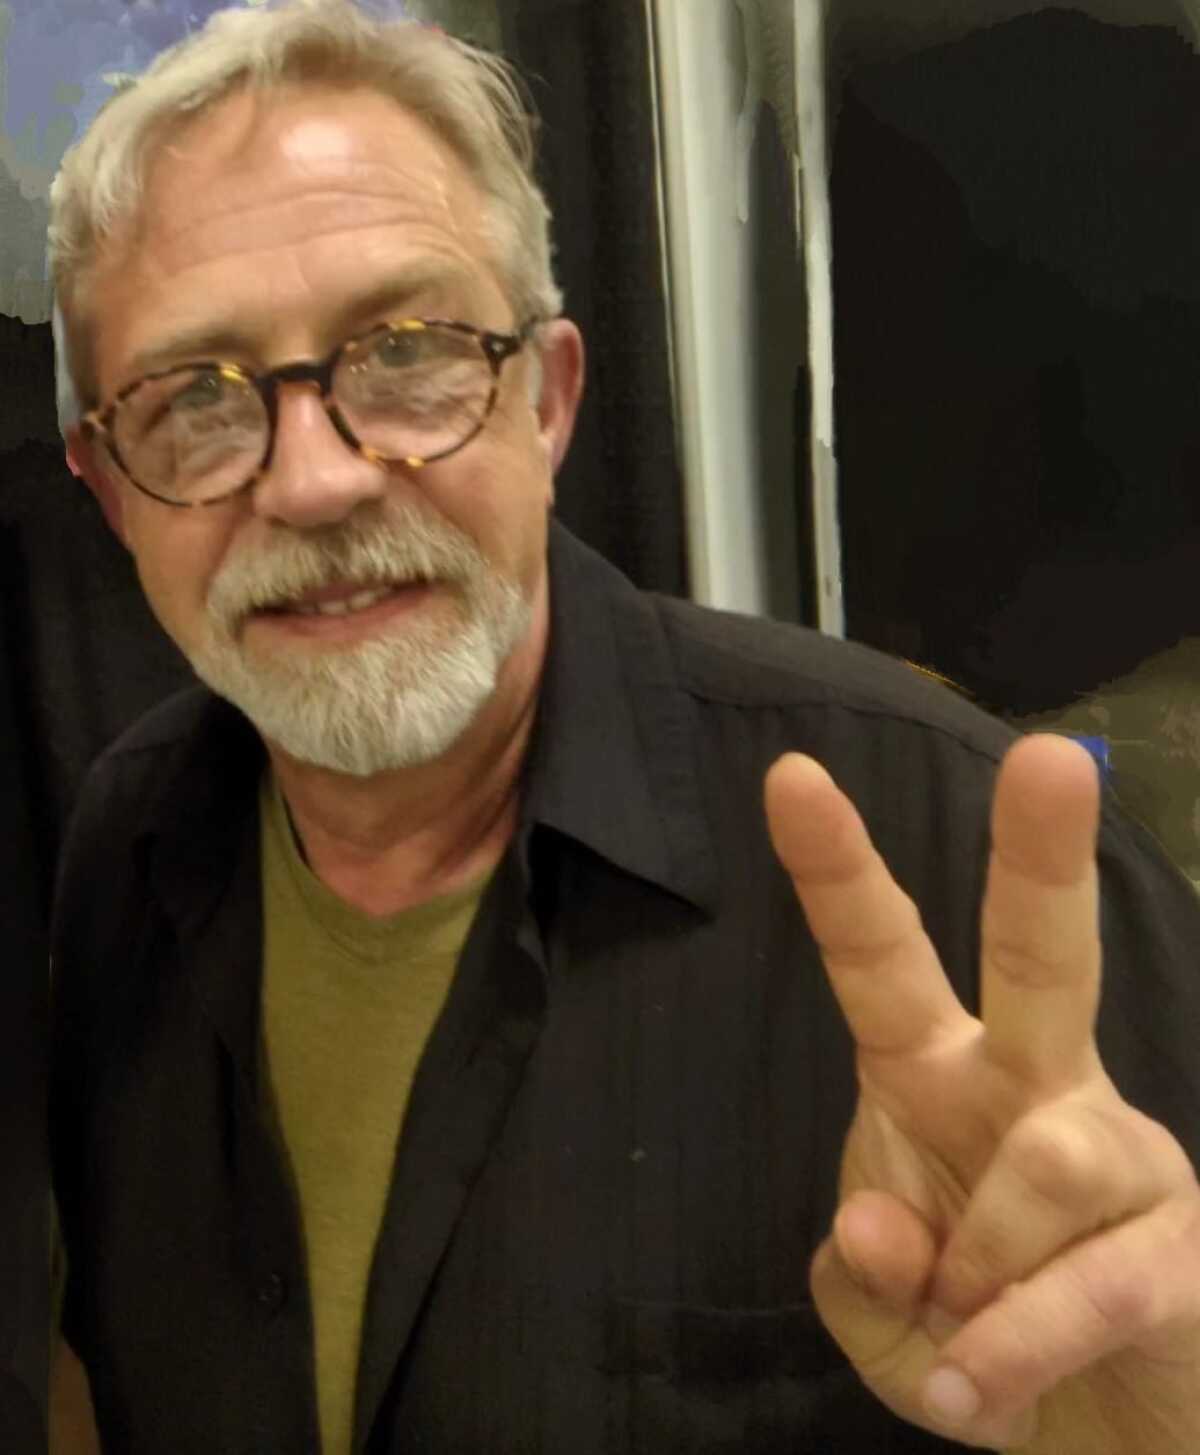 A man with gray hair, a beard and glasses making a peace sign.